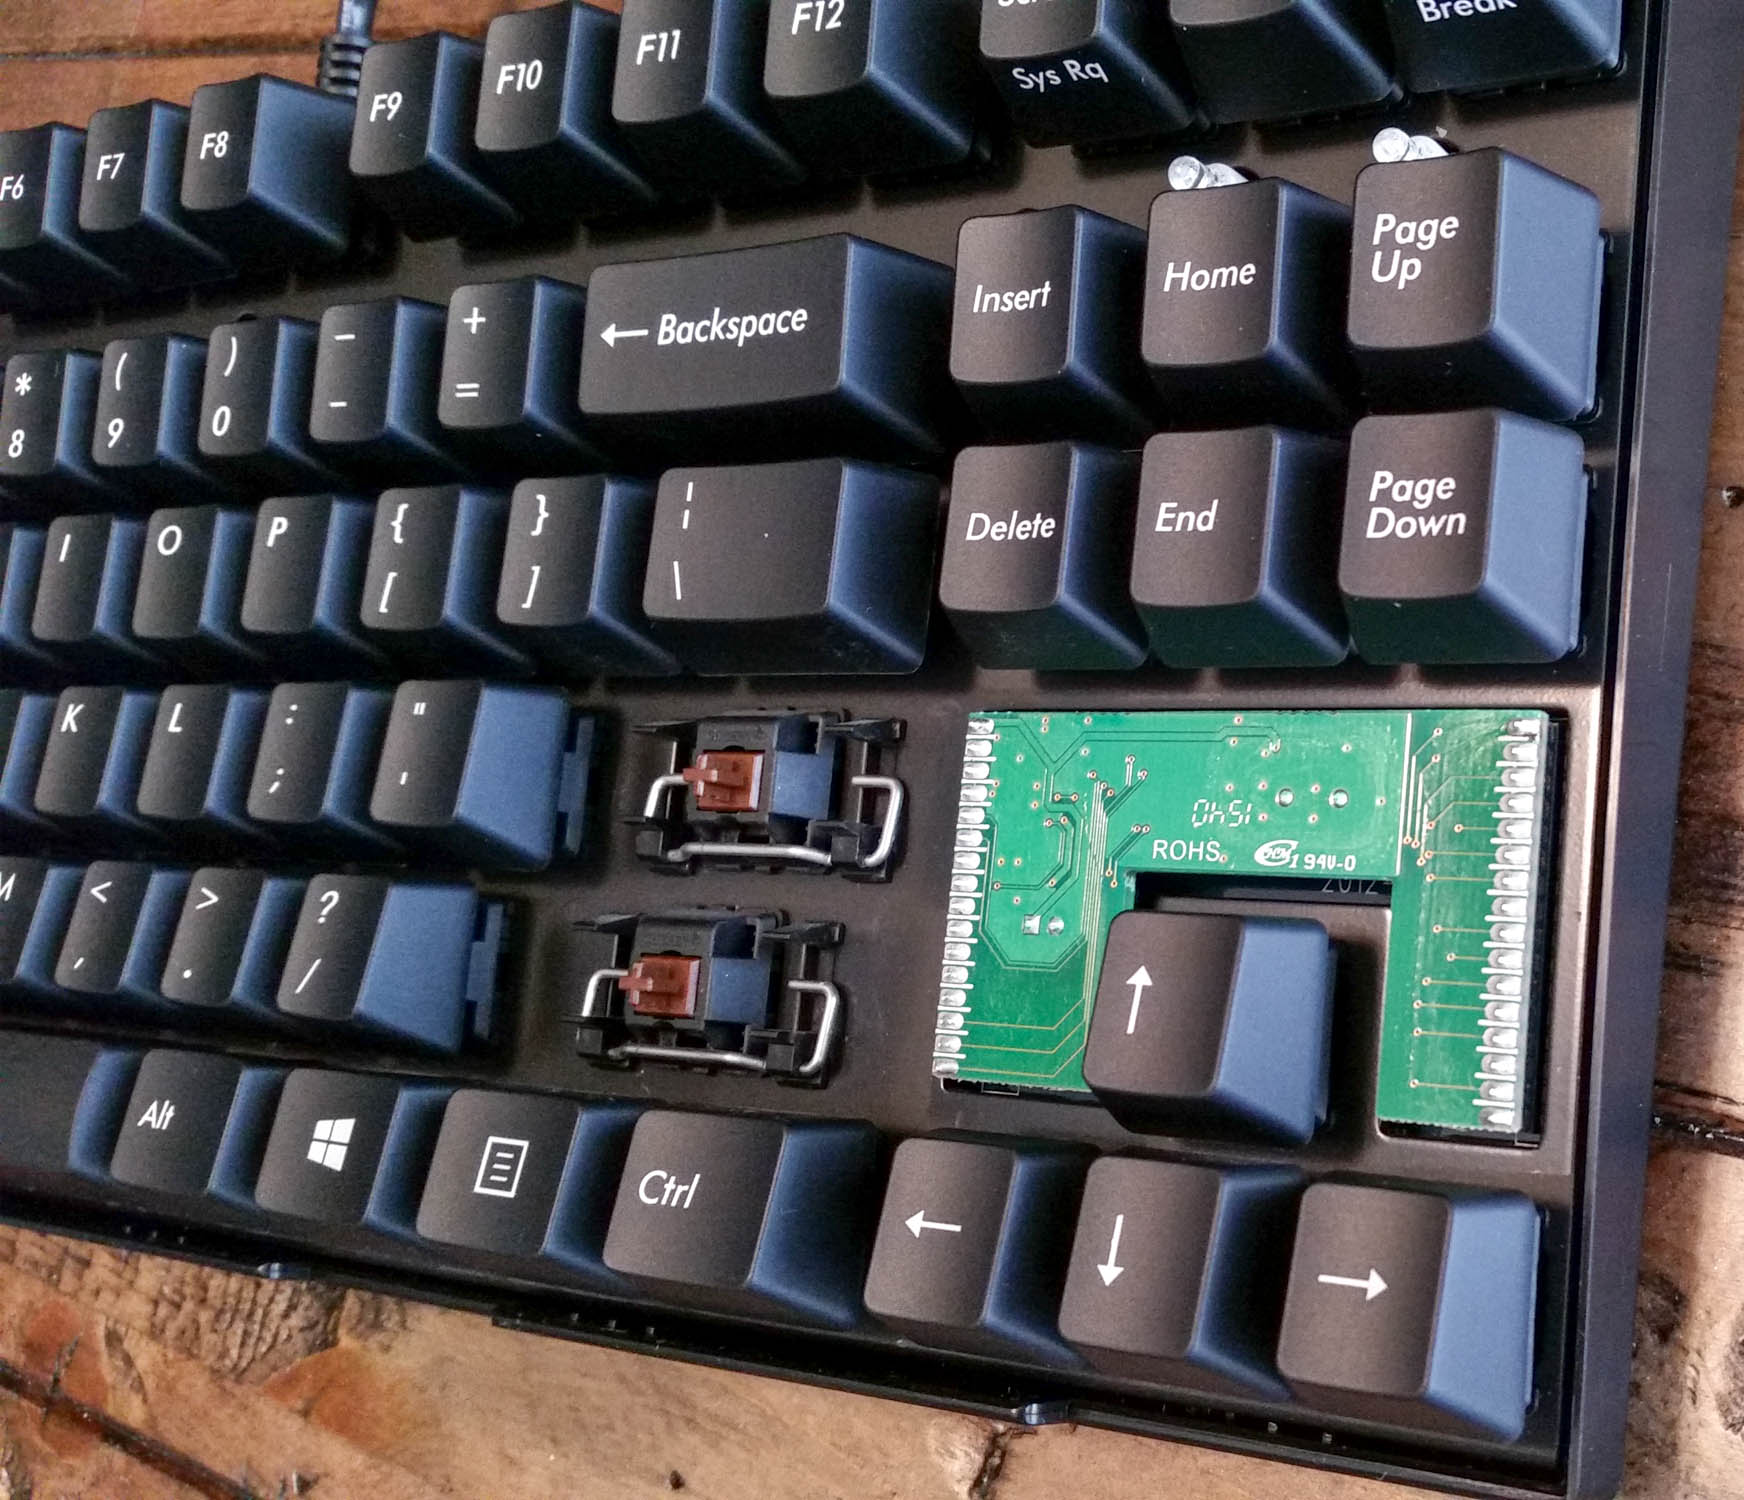 The top removed, plus shift and enter keys removed to expose the Cherry Brown key switches. This provides easier access to the controller when removing it.